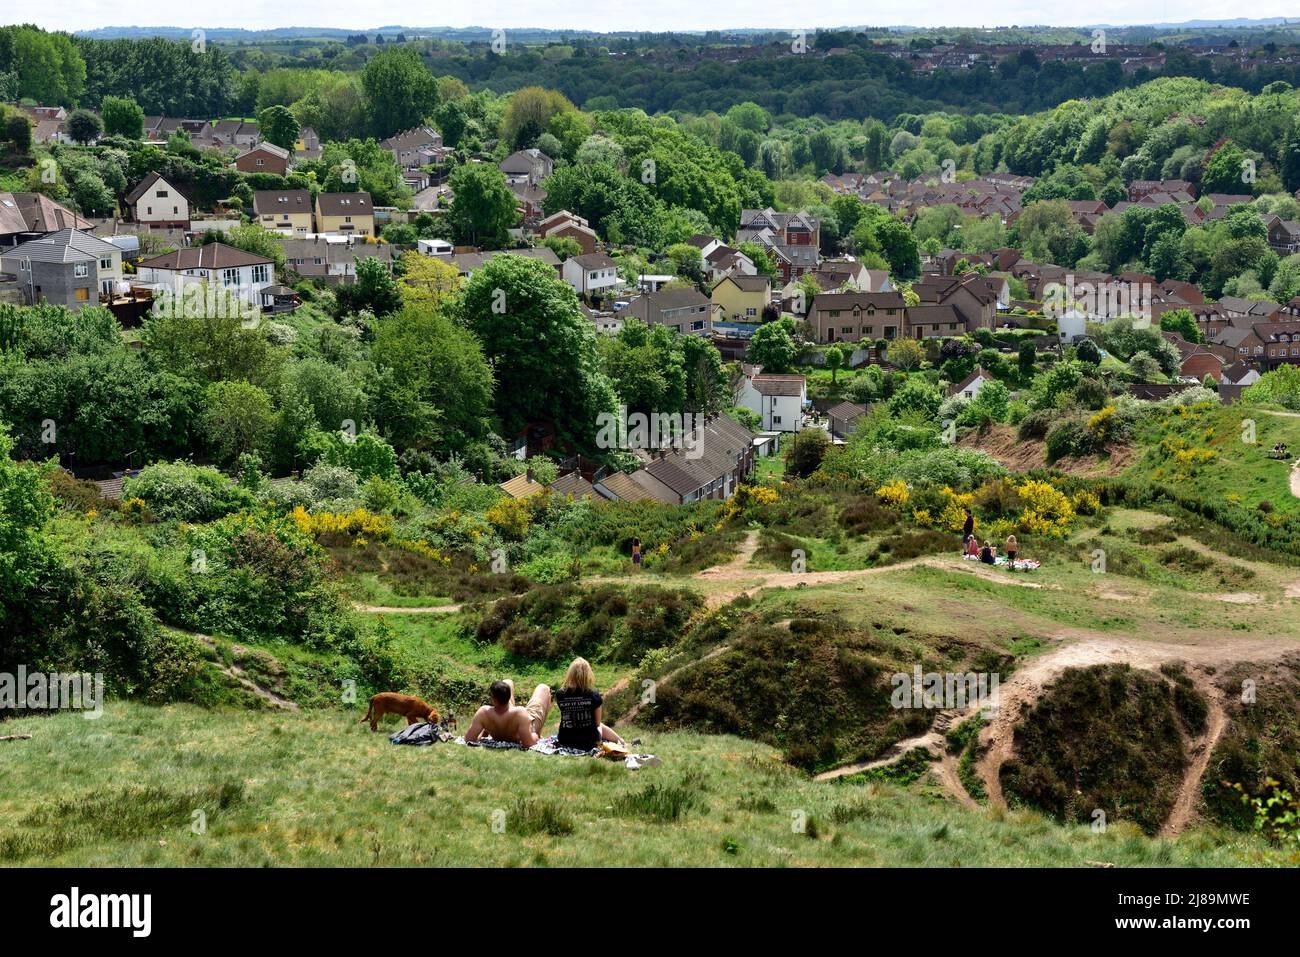 Looking south over trees and houses of Bristol from Troopers' Hill with people relaxing. Former mining area now park and nature reserve, UK Stock Photo